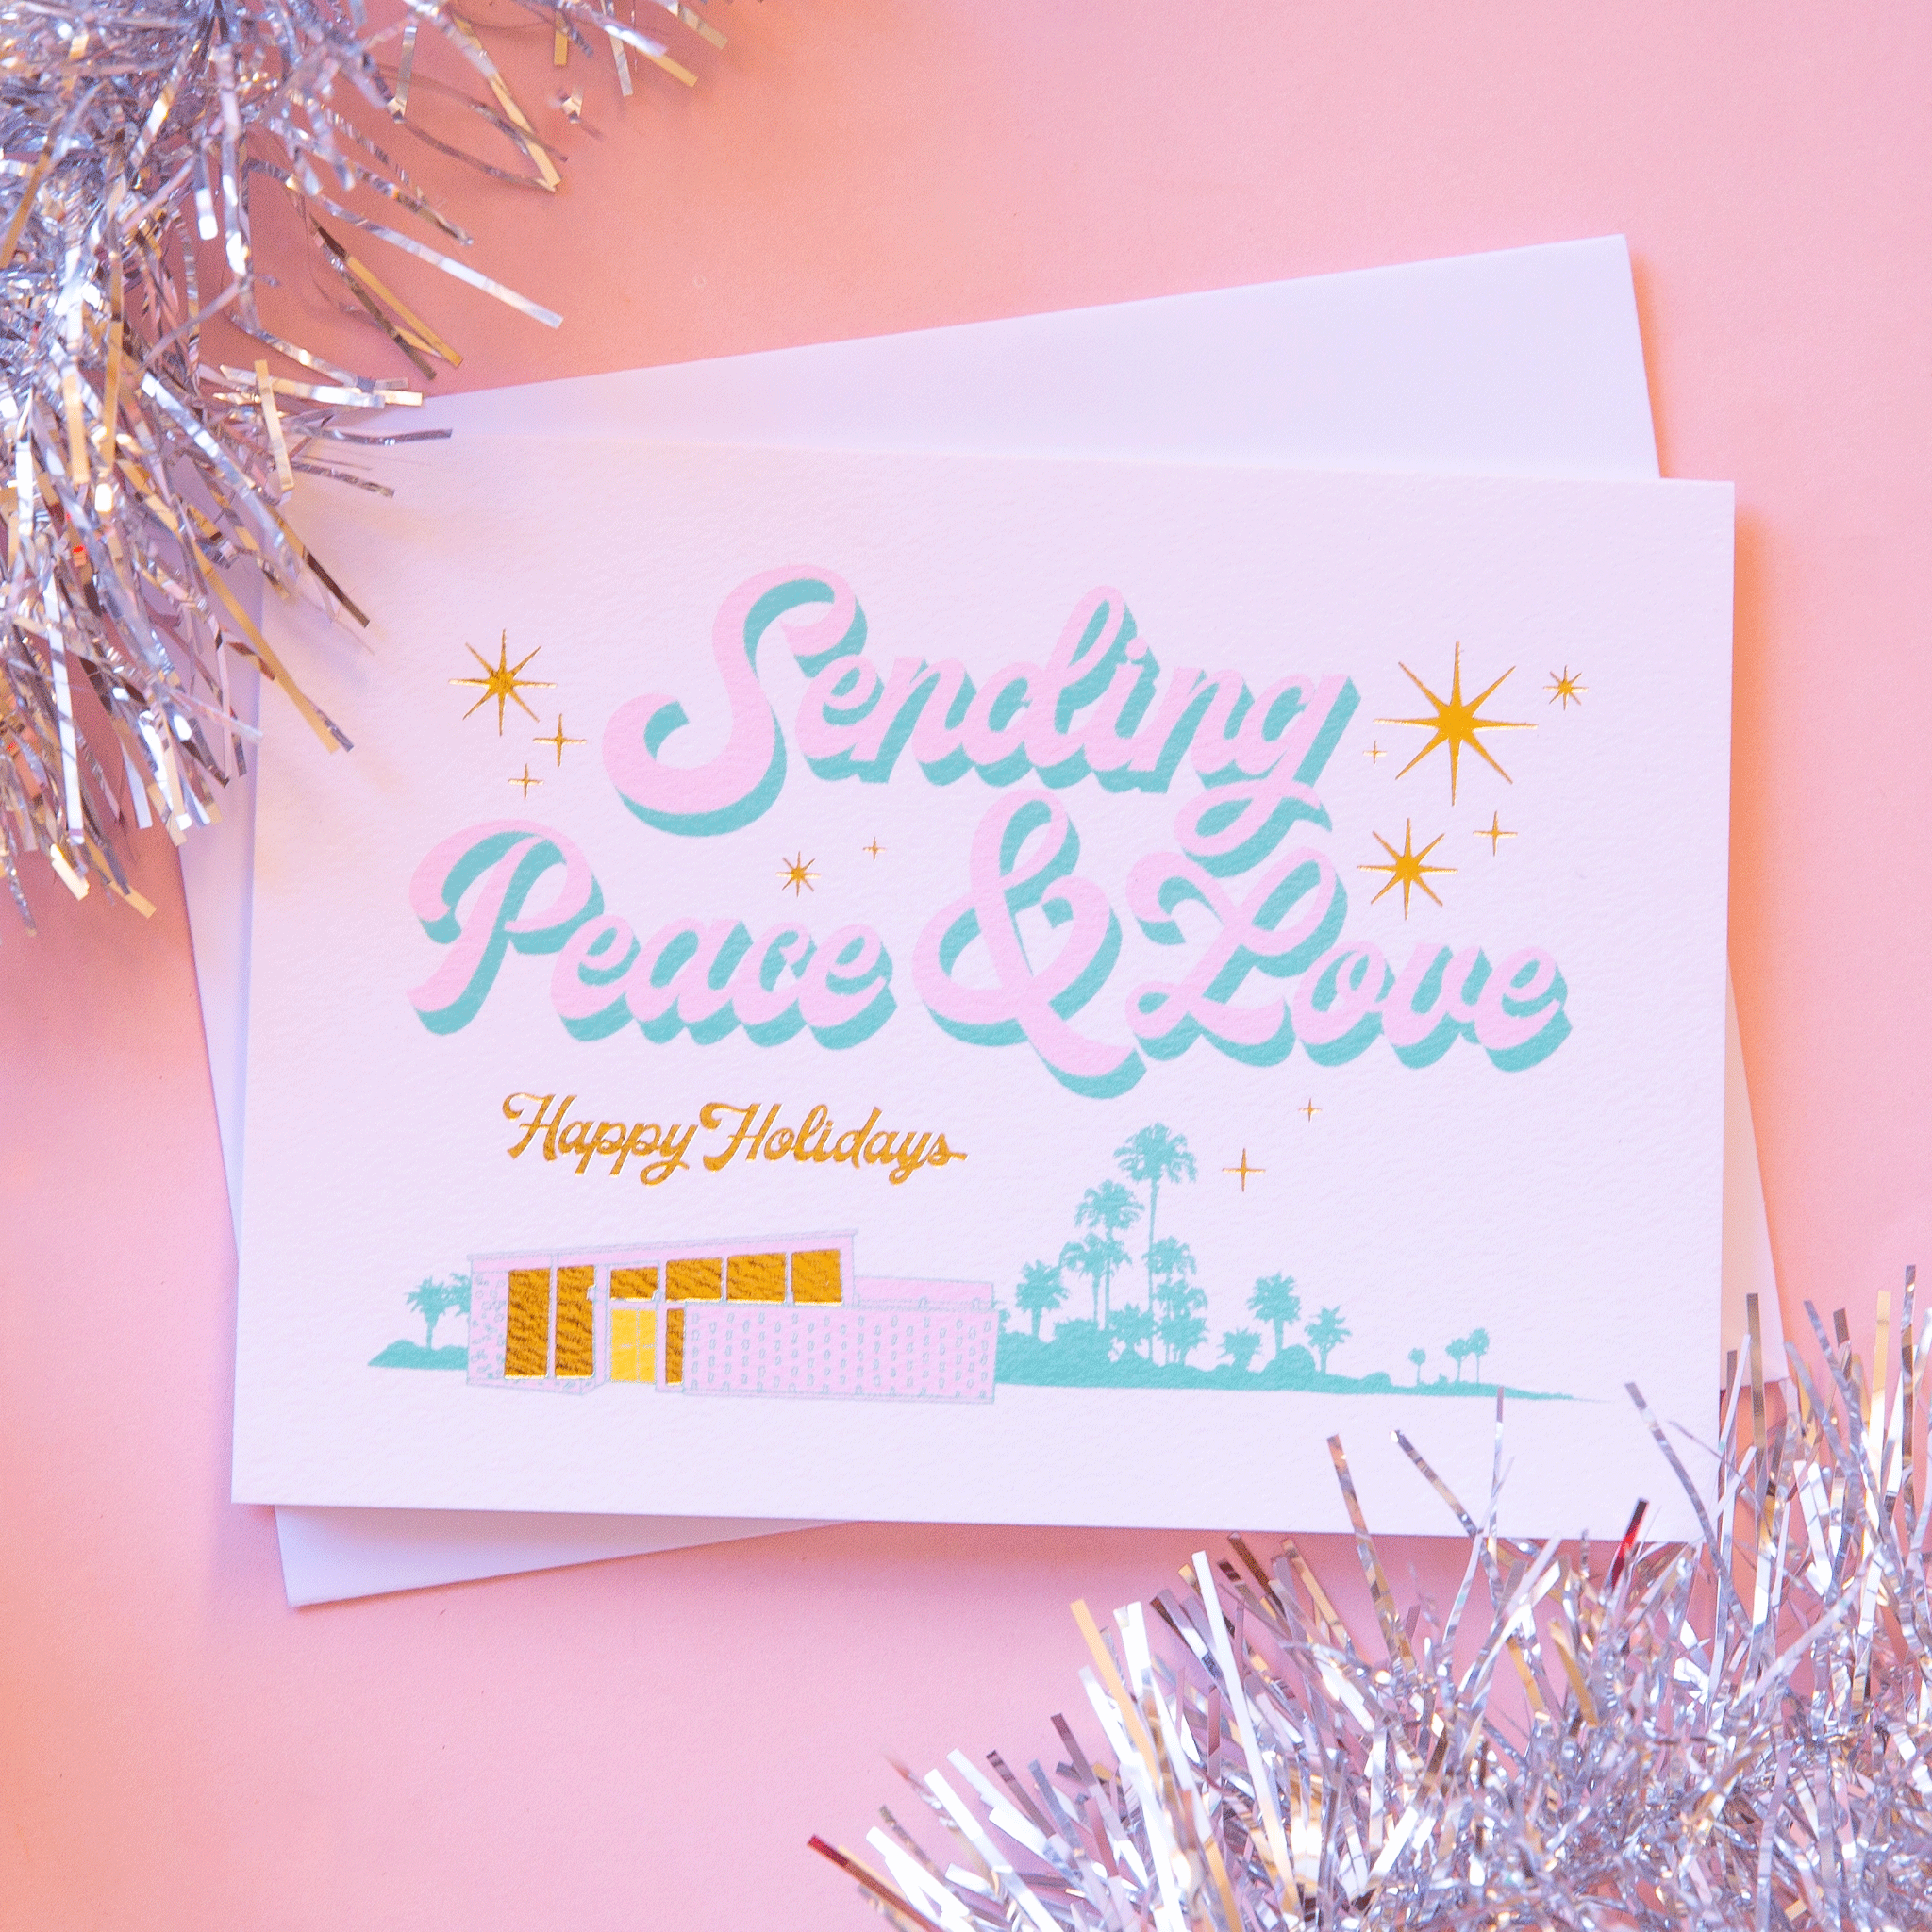 On a pink background is a white, pink and blue holiday card that reads, "Sending Peace & Love Happy Holidays".